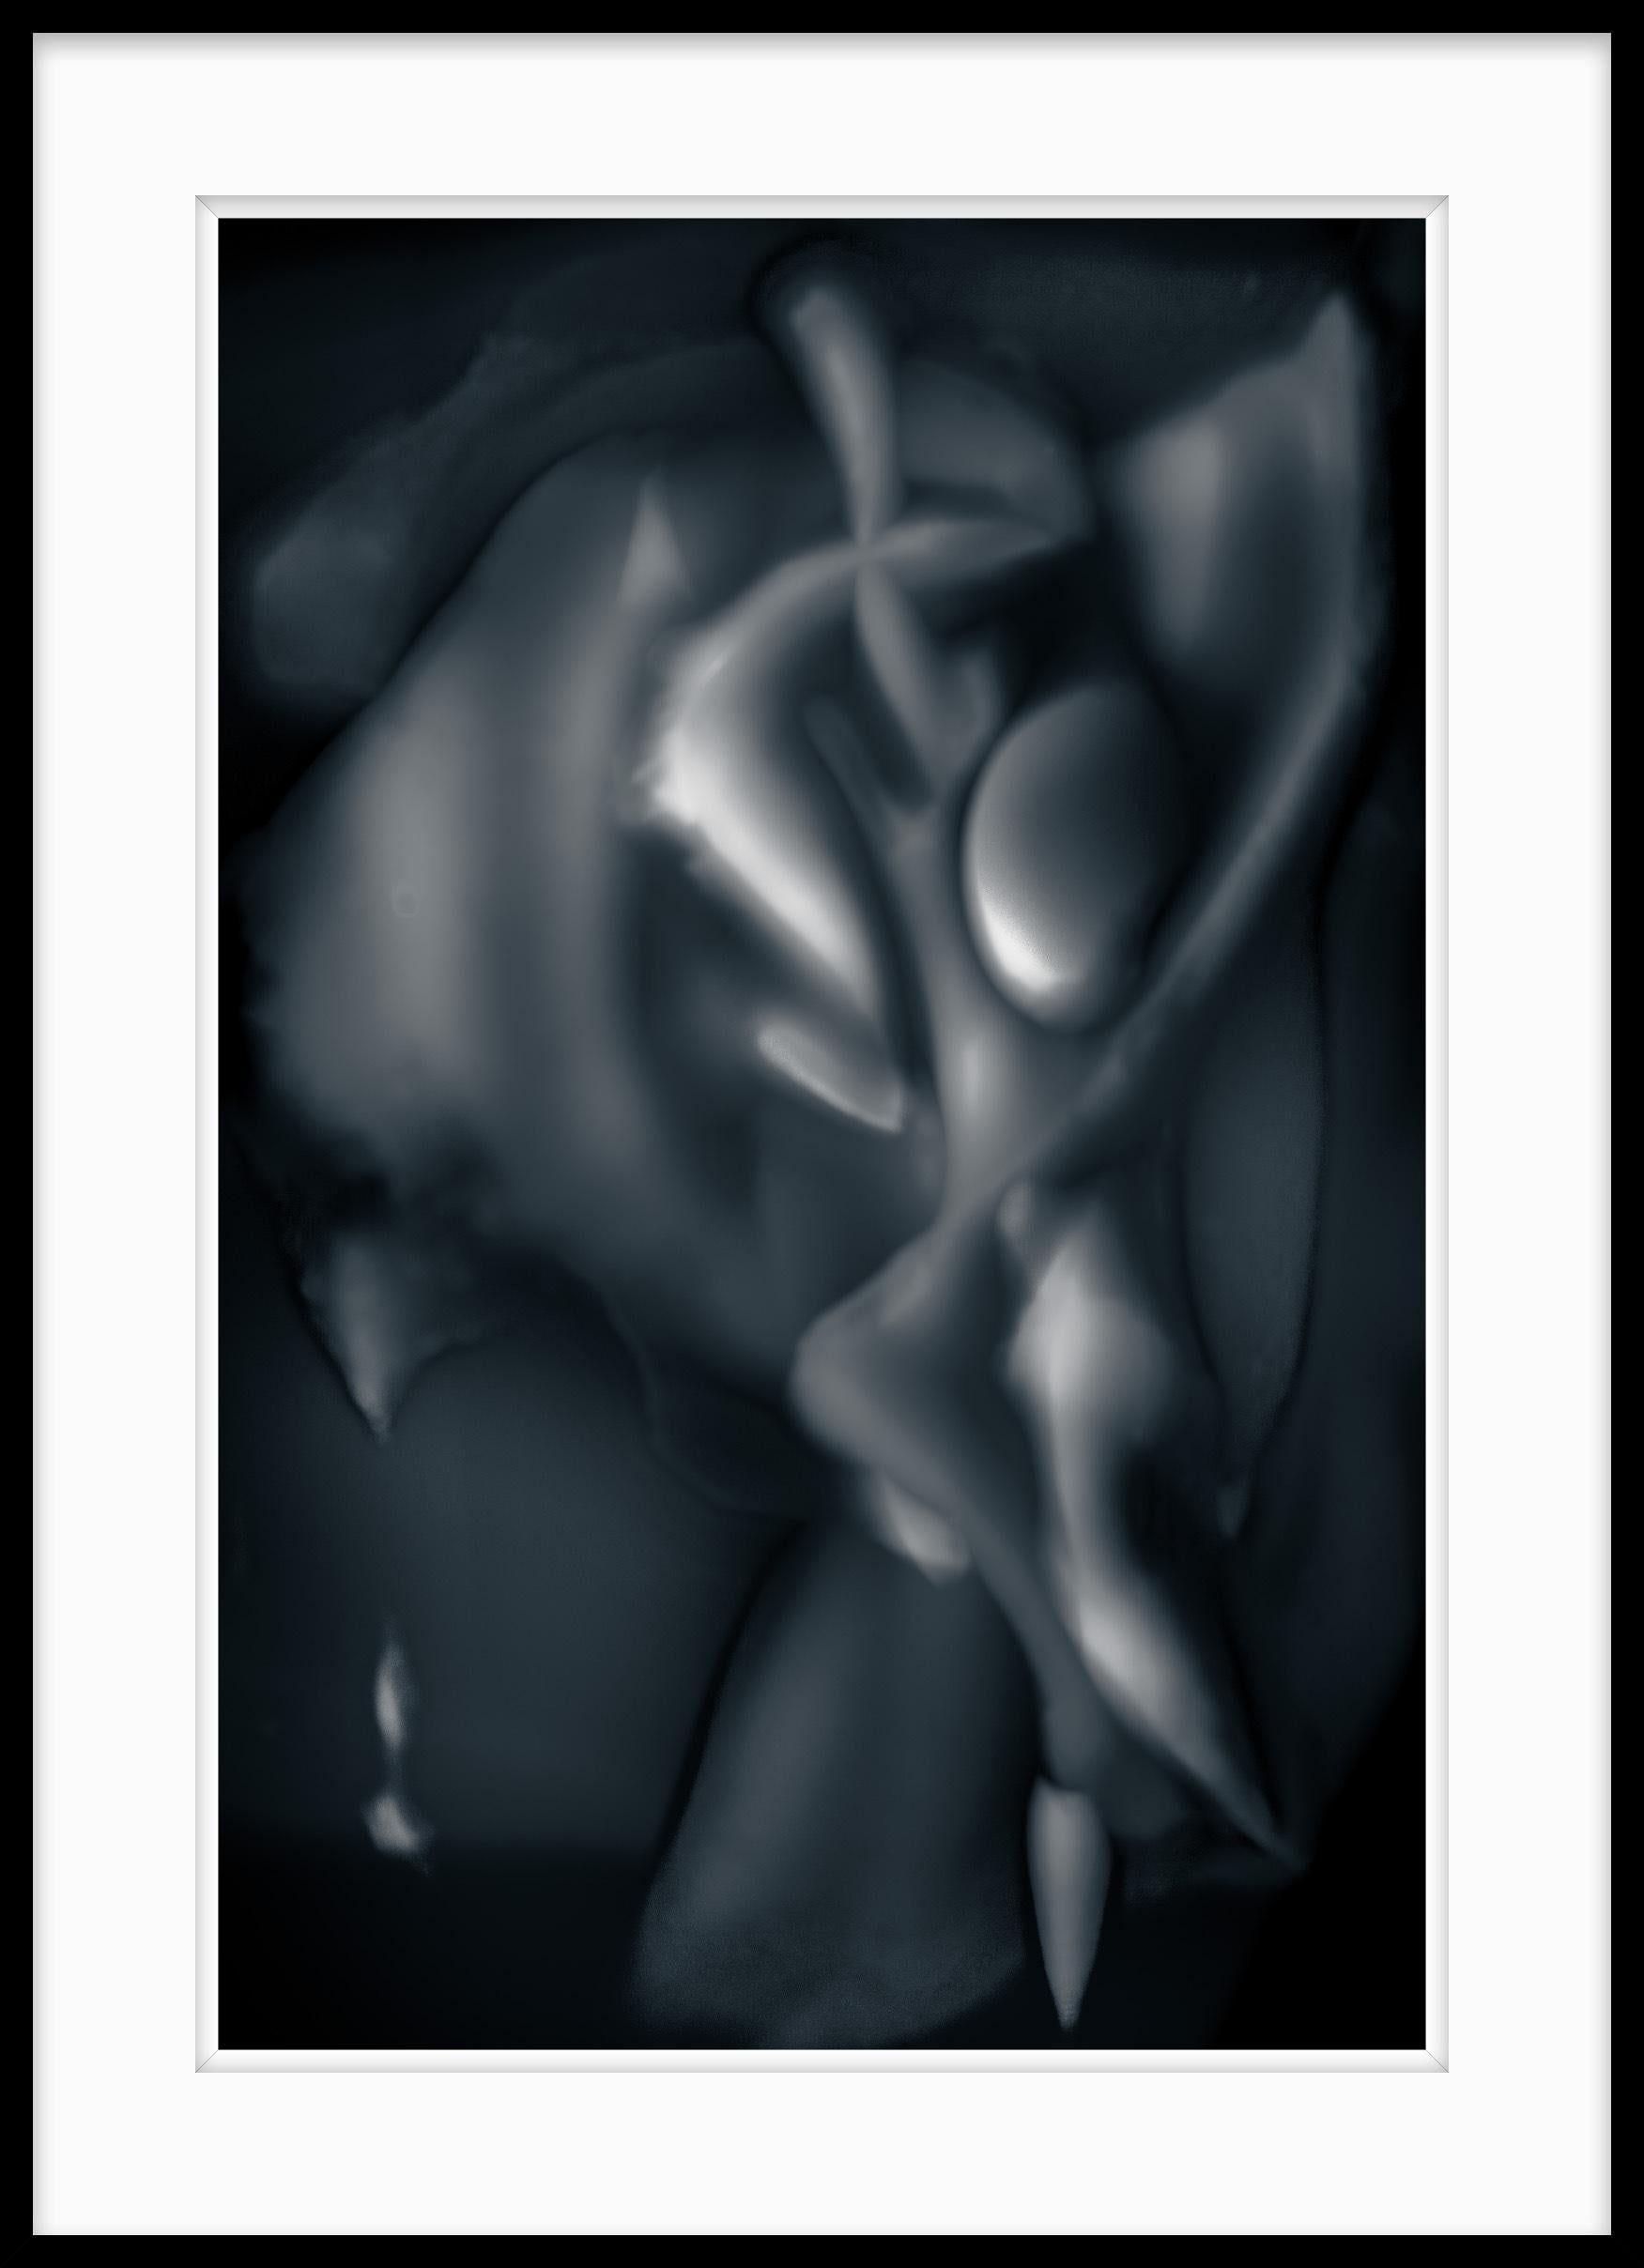 This is Untitled #25 from the Moments of Evolution series.

Moments of Evolution explores the transformations of organic forms as they evolve into an endless array of ethereal configurations.

The subjects float, shifting scale, in an unfamiliar